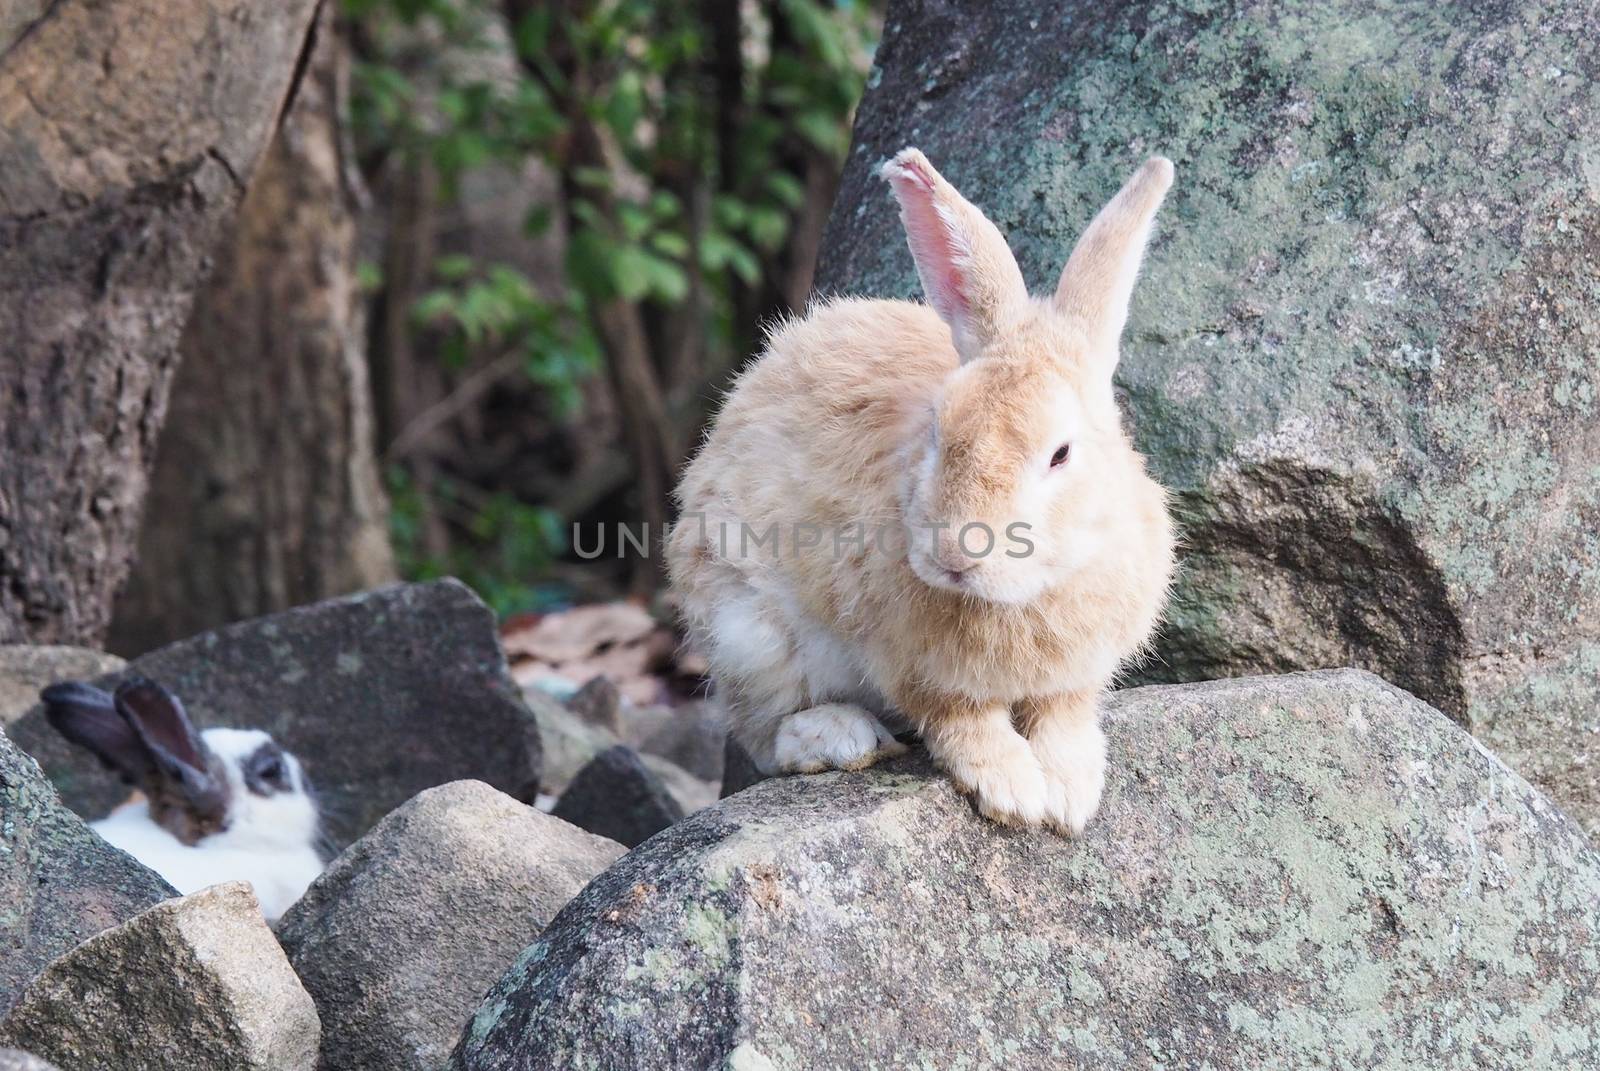 Long-eared rabbit is suffering from skin disease. Ringworm disease from infection and inflammation. hair loss and itching. Caring for sick rabbits.